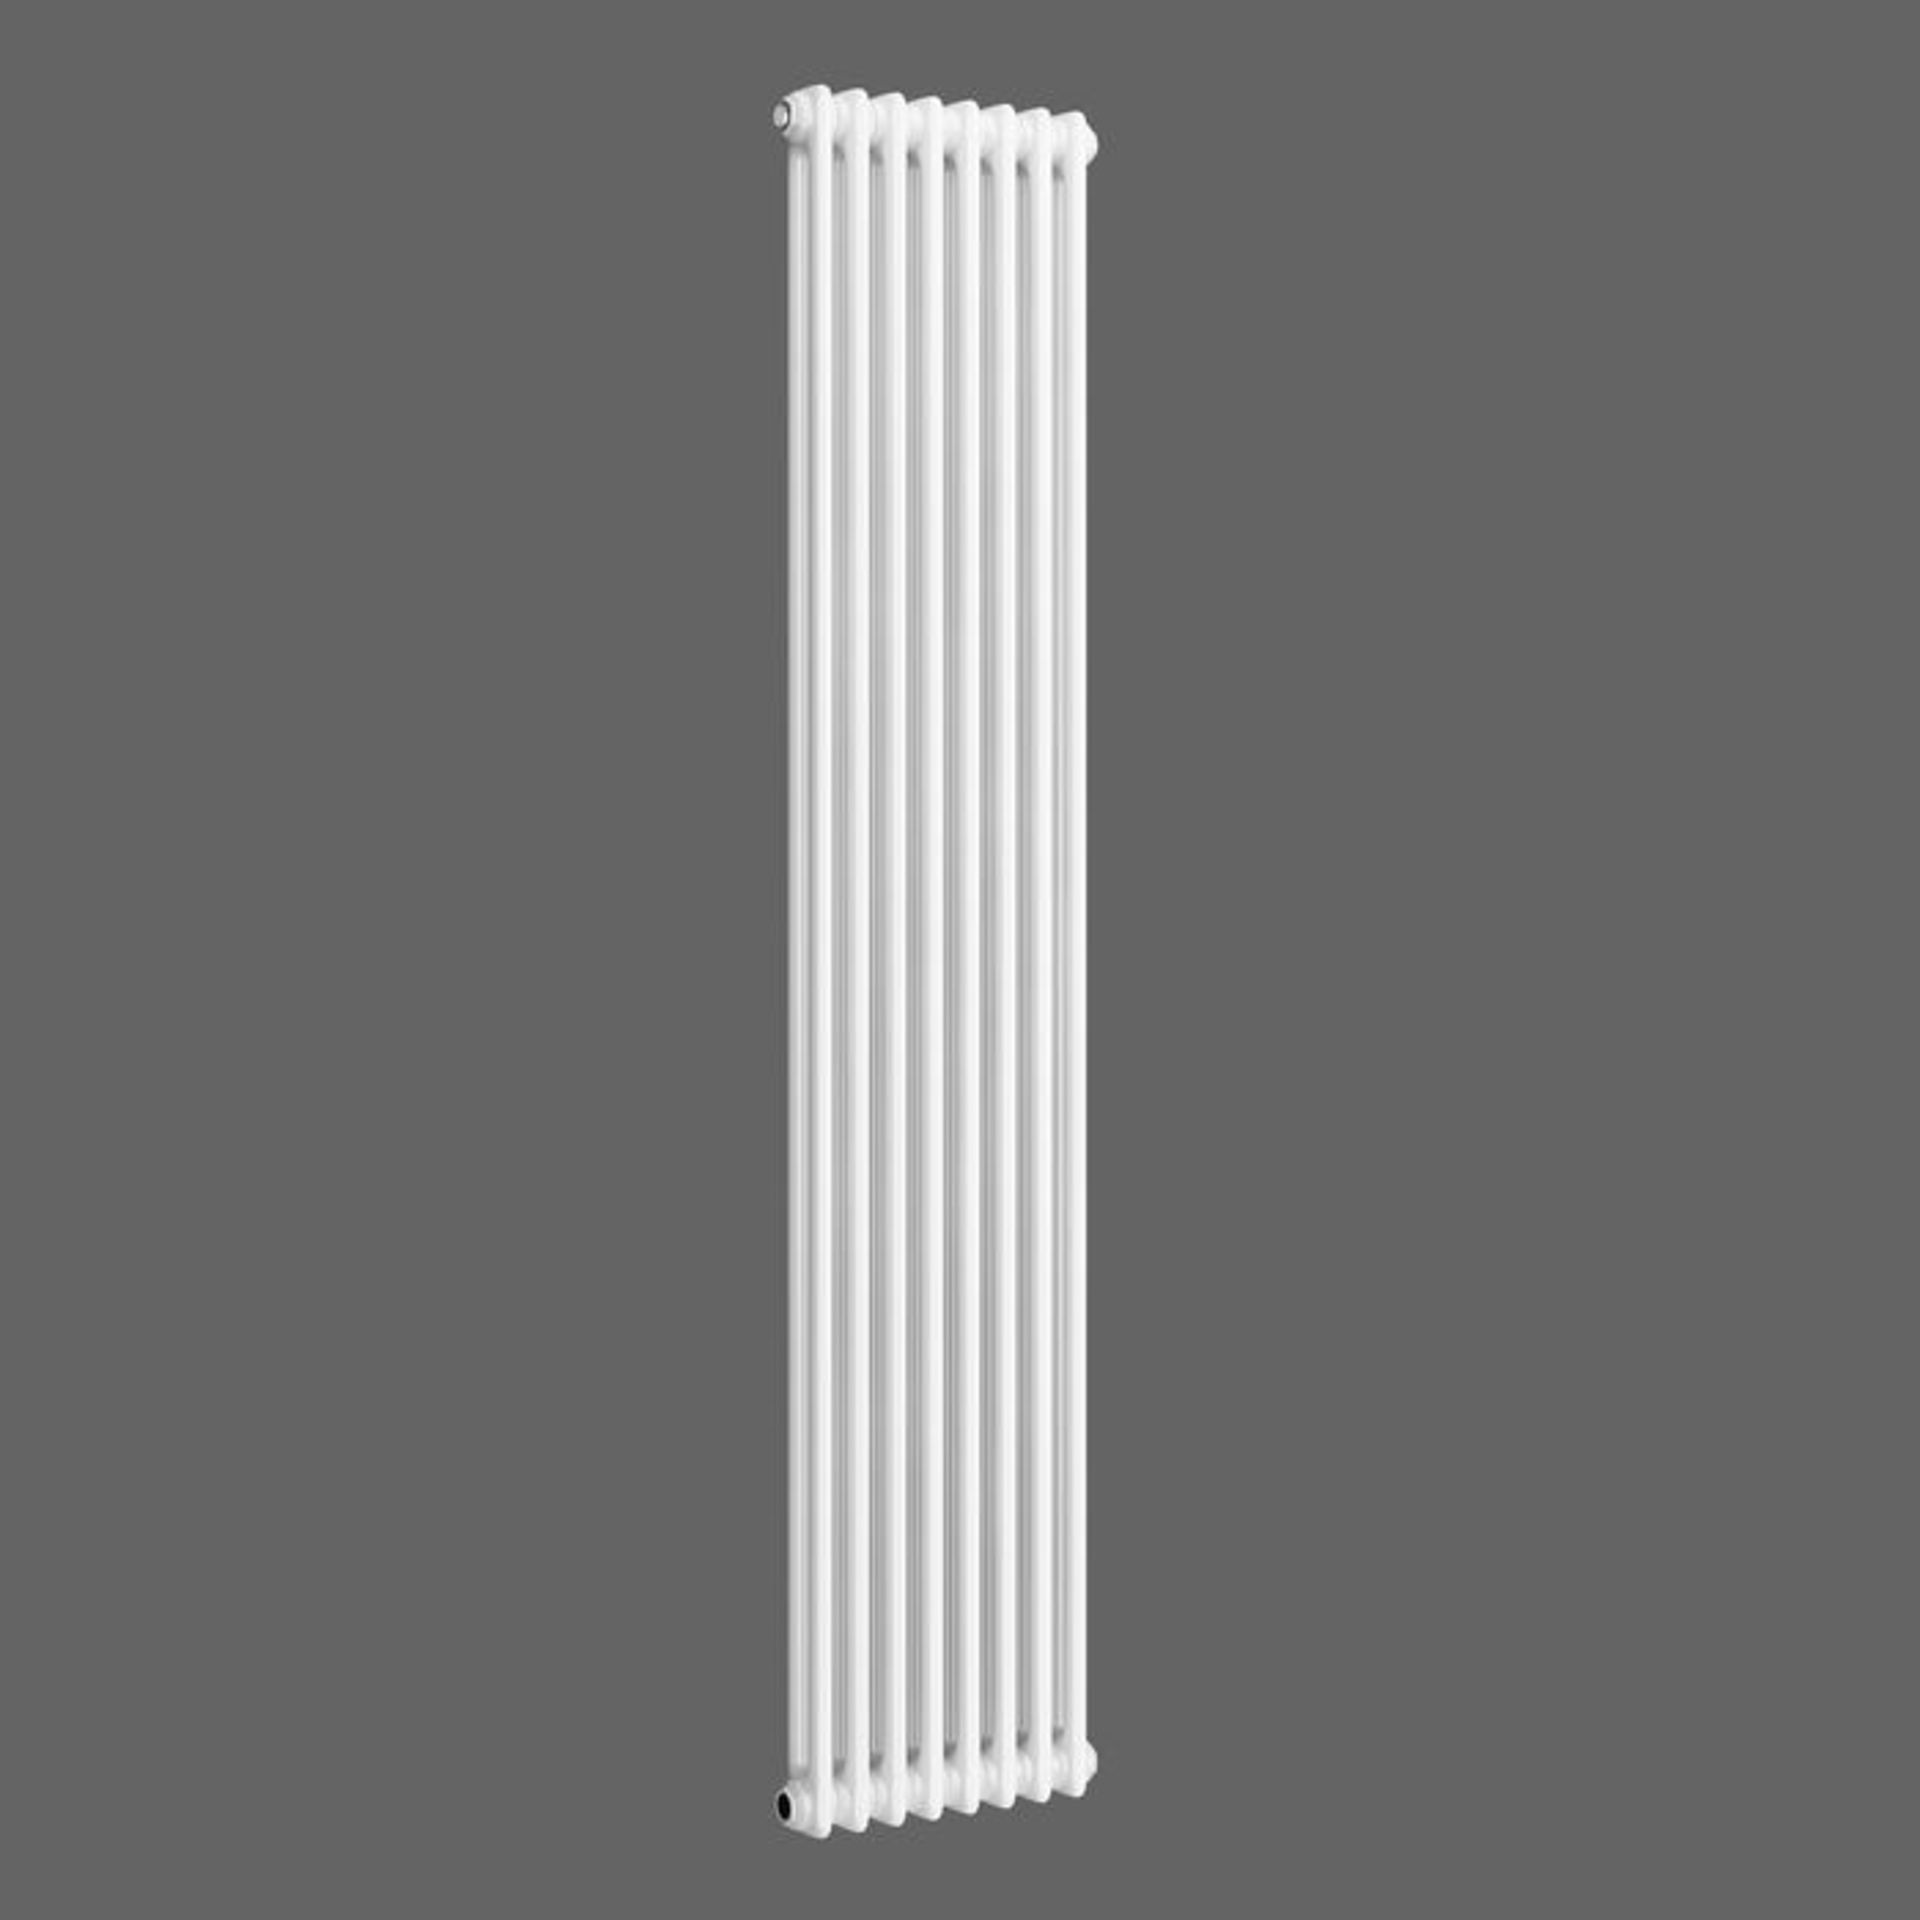 1800x383mm White Double Panel Vertical Colosseum Traditional Radiator. RRP £408.99. Made from ... - Image 4 of 4